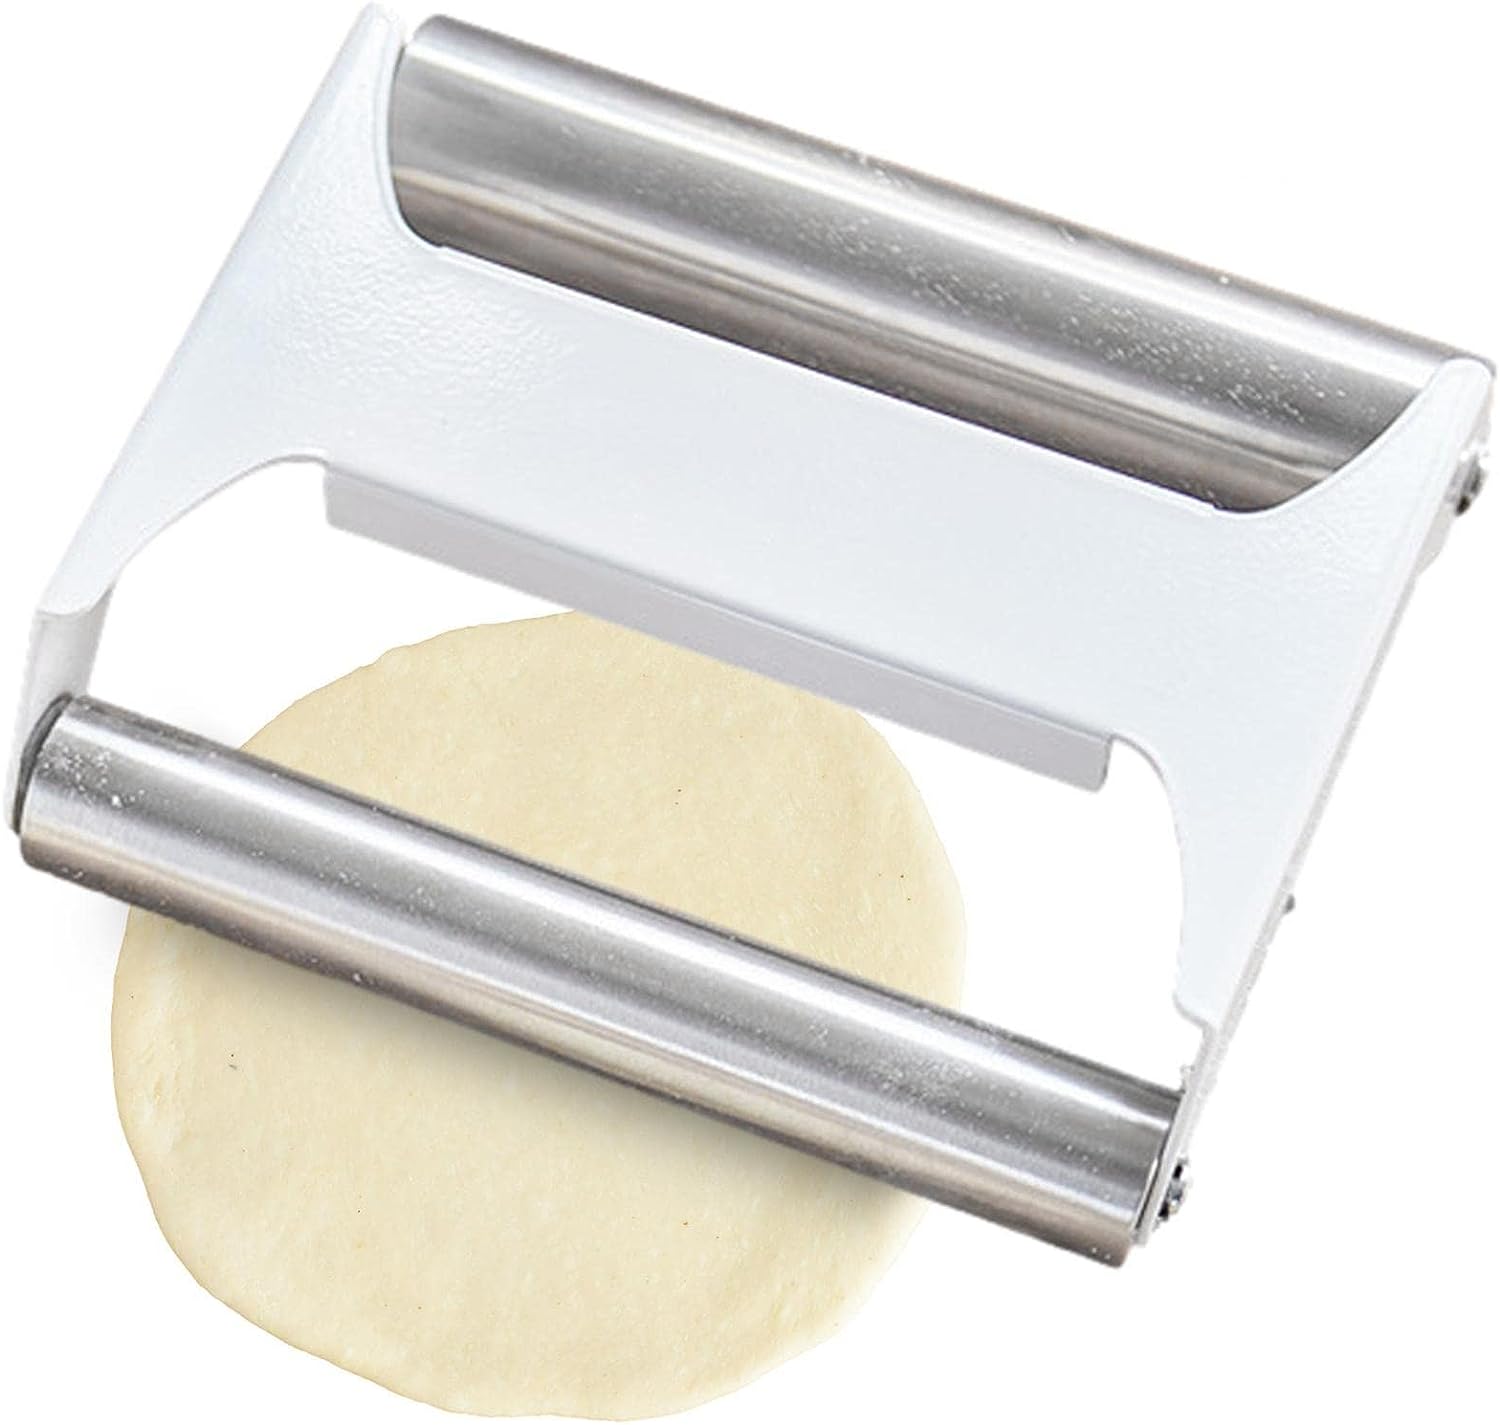 Rolling out Dumplings dough using the Double-Sided Stainless Steel Dough Roller for Baking